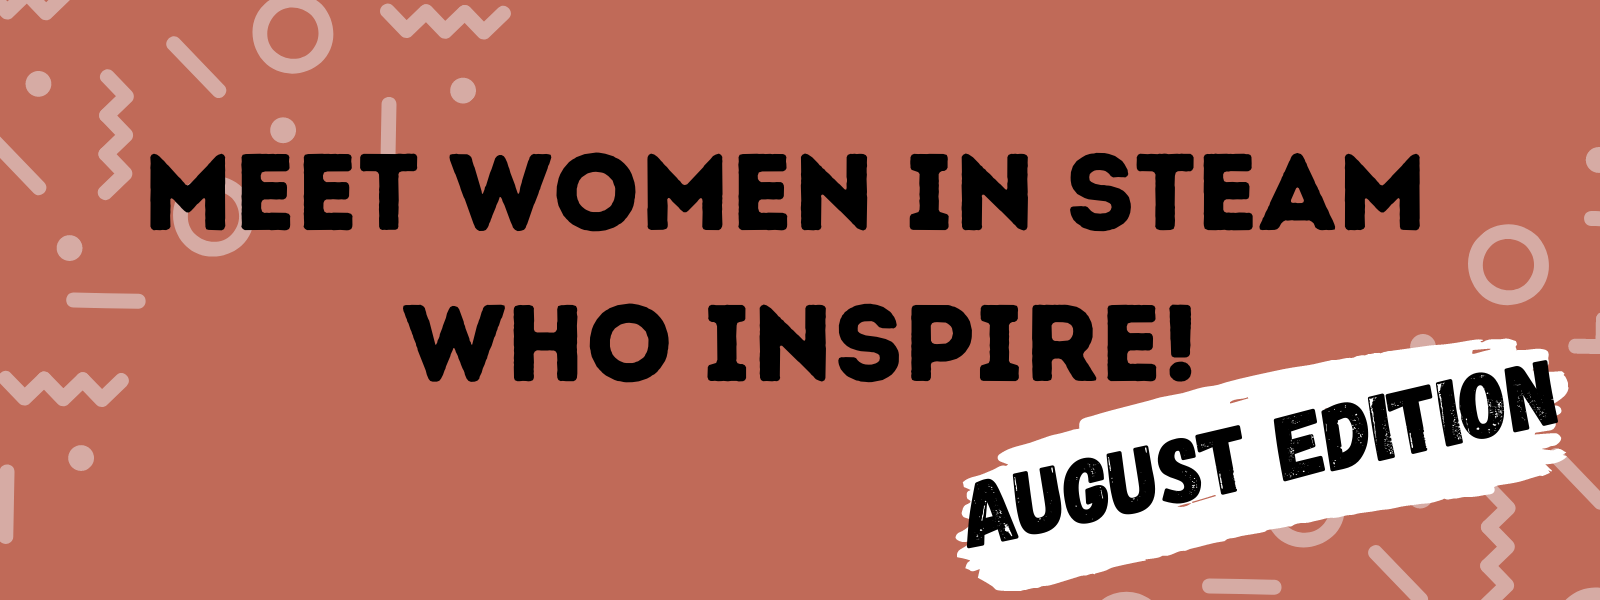 meet women in steam who inspire august edition 2021